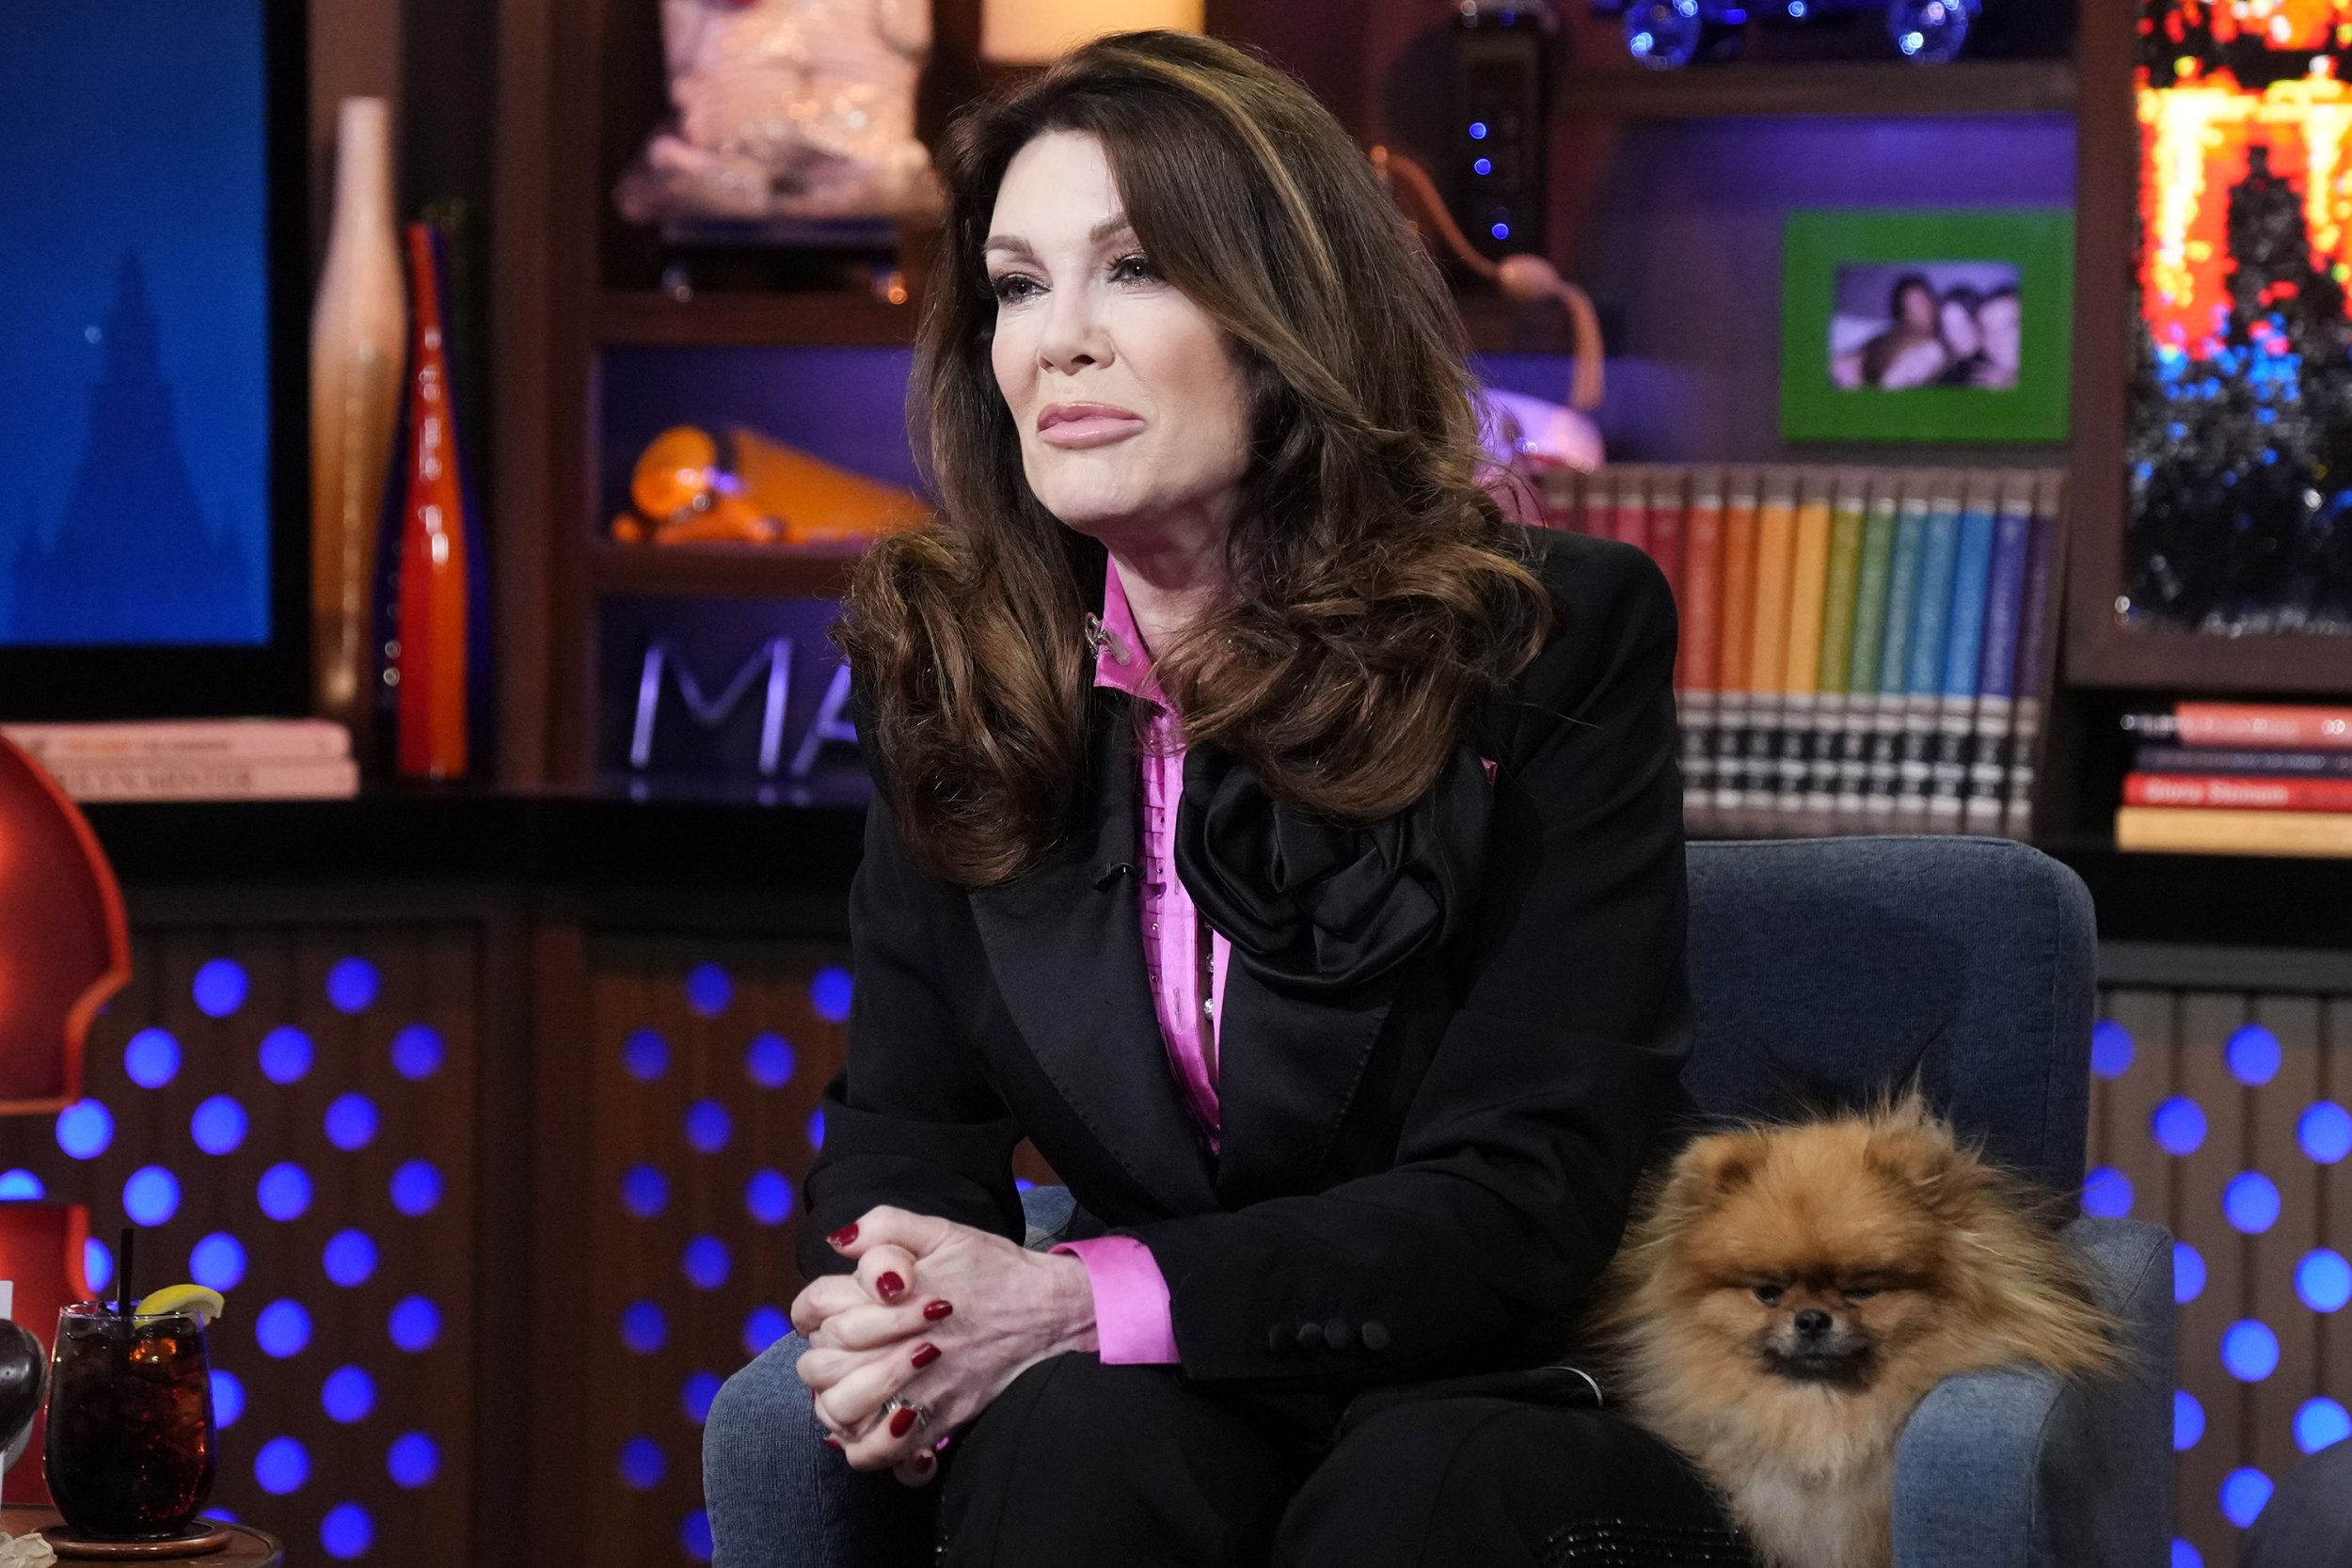 Lisa Vanderpump and her dog on the set of Watch What Happens Live with Andy Cohen